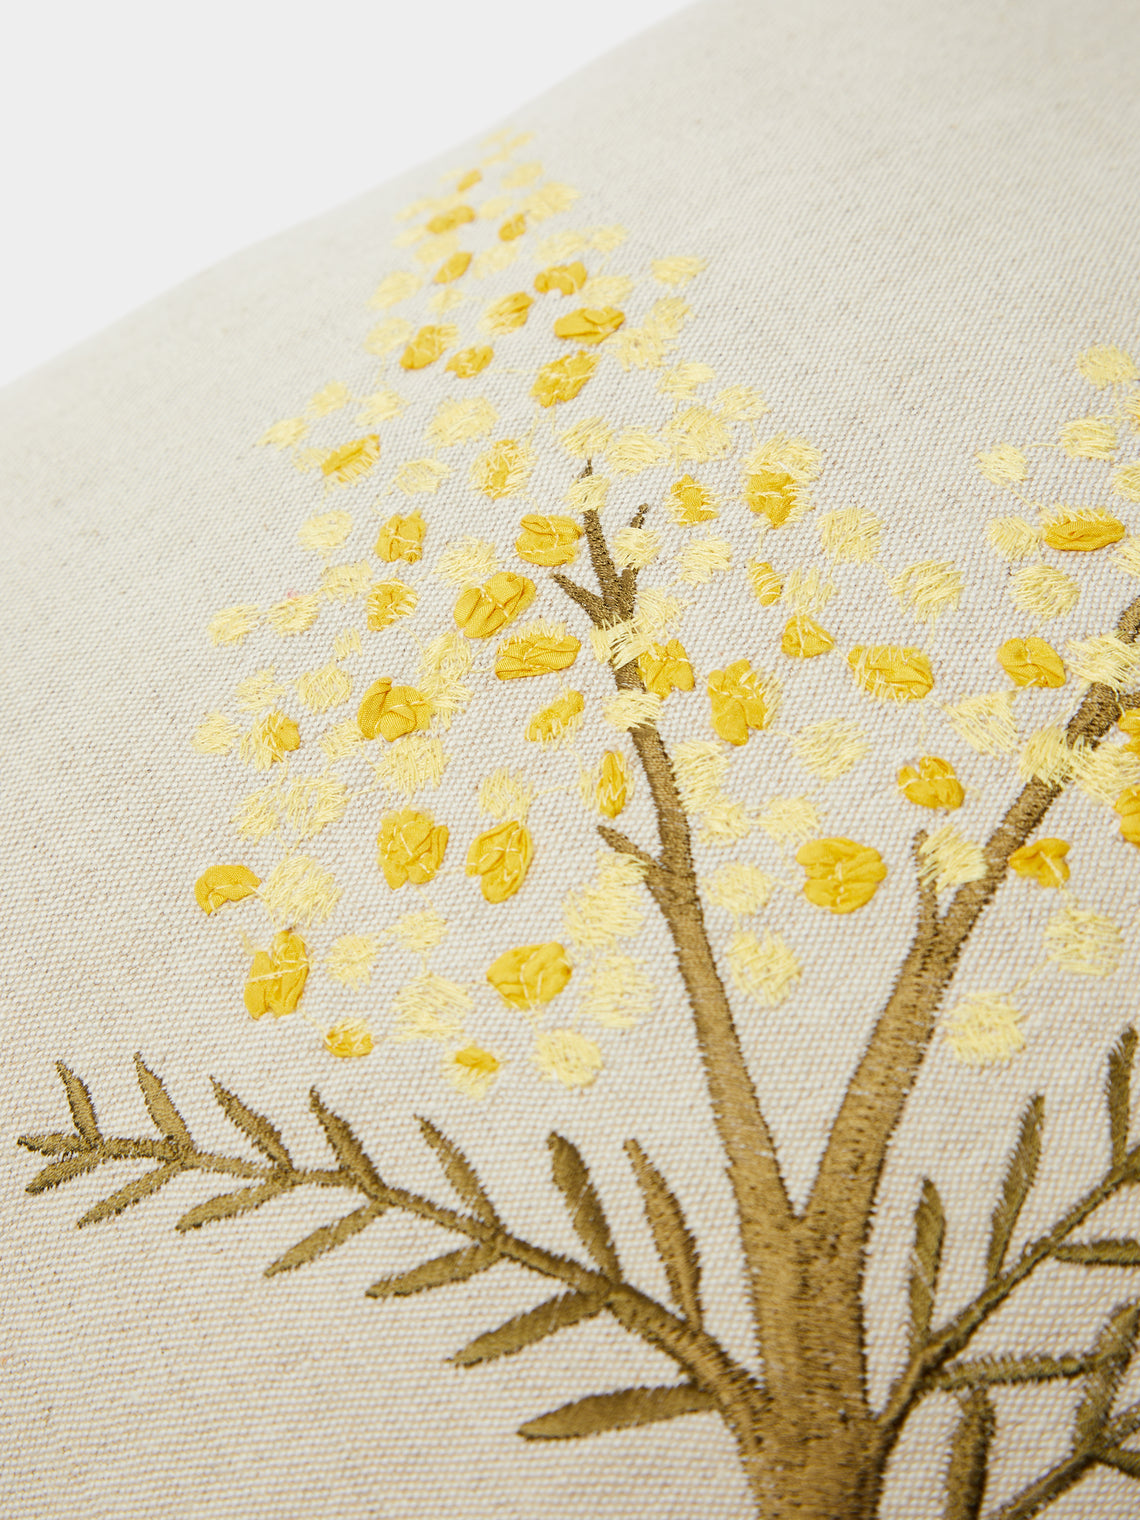 Lora Avedian - Mimosa Hand-Embroidered Linen Cushion -  - ABASK